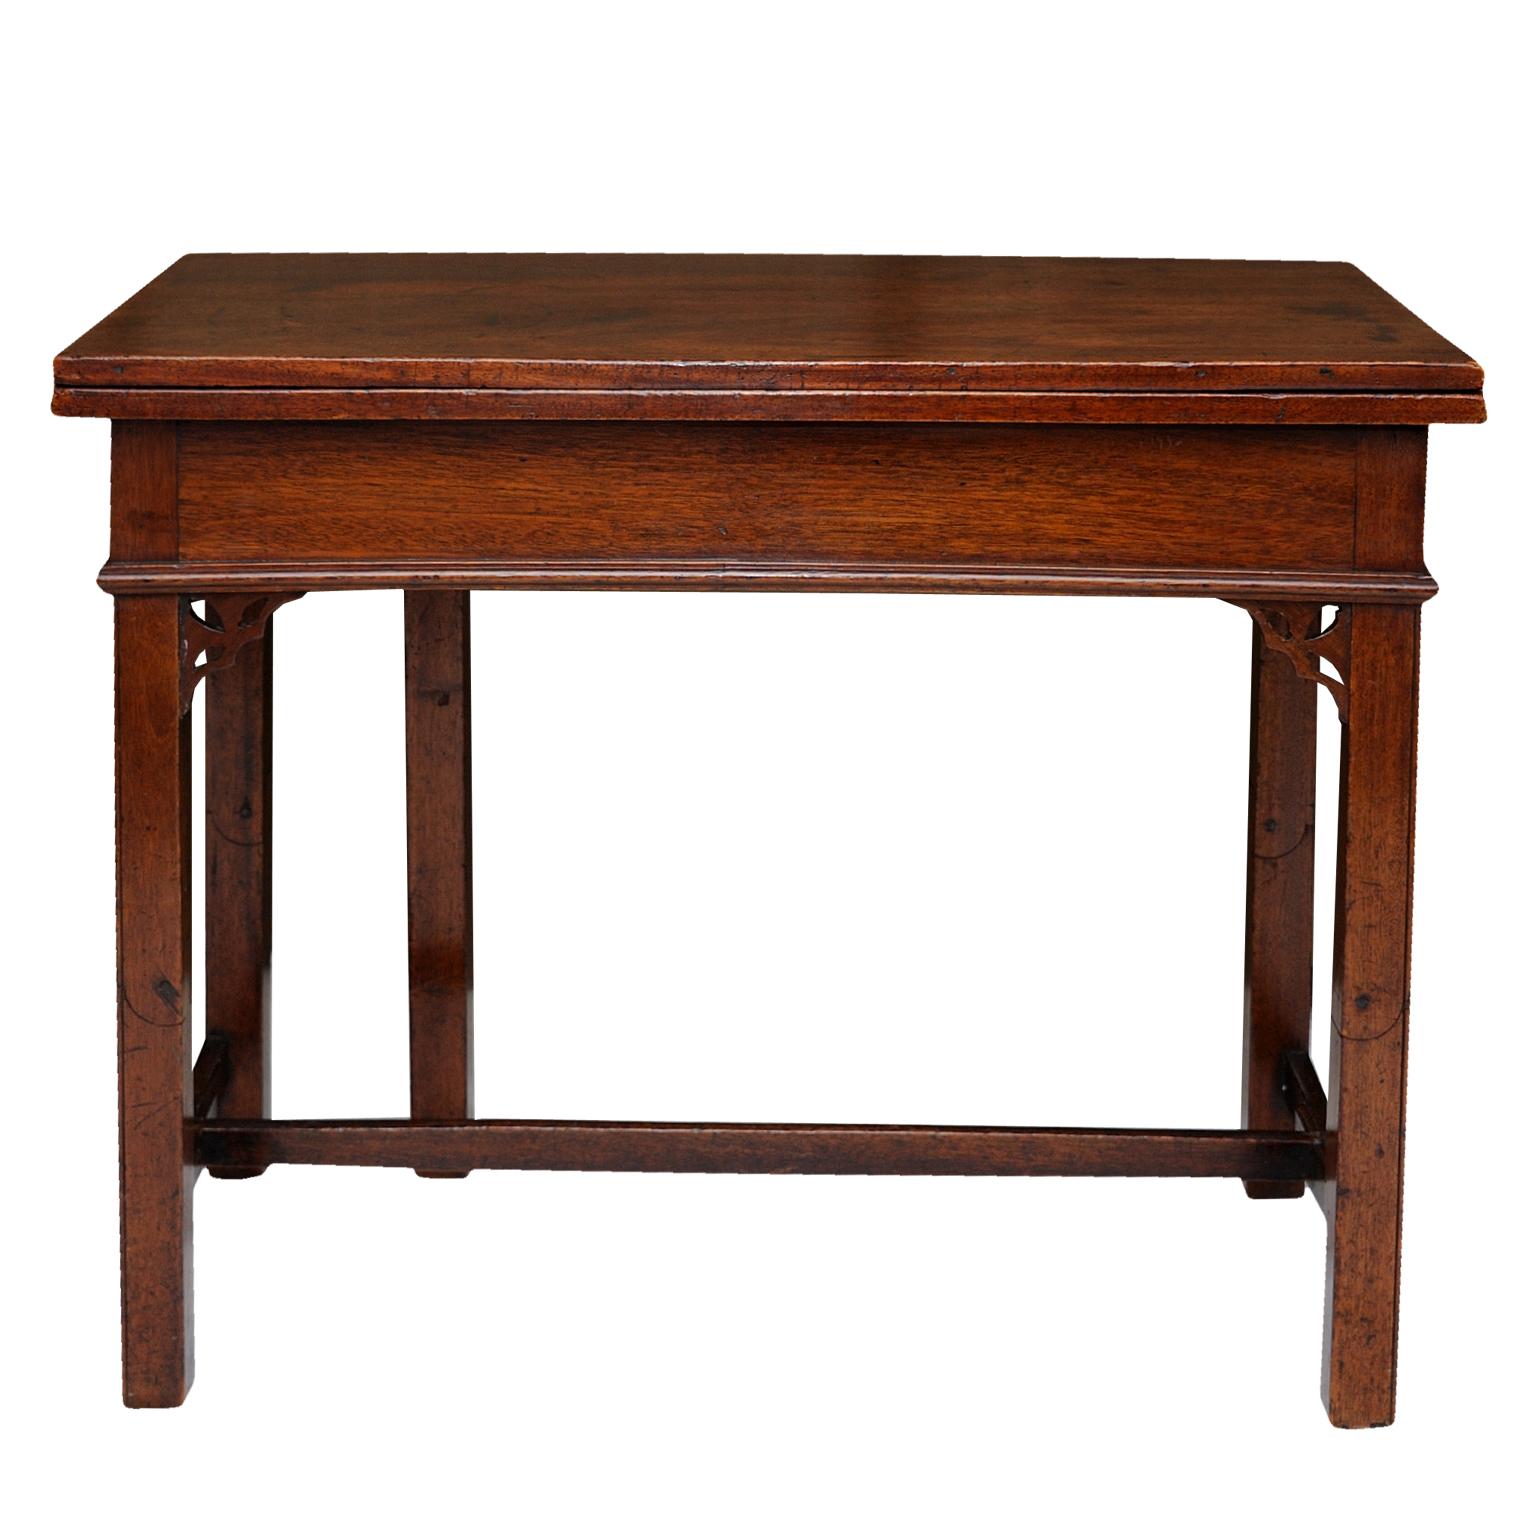 This is a fantastic and extremely rare Chippendale period mahogany Campaign Table in totally original condition.

With folding top and two drawers, with their original brass and steel swann neck handles and escutcheons situated at either end.

The